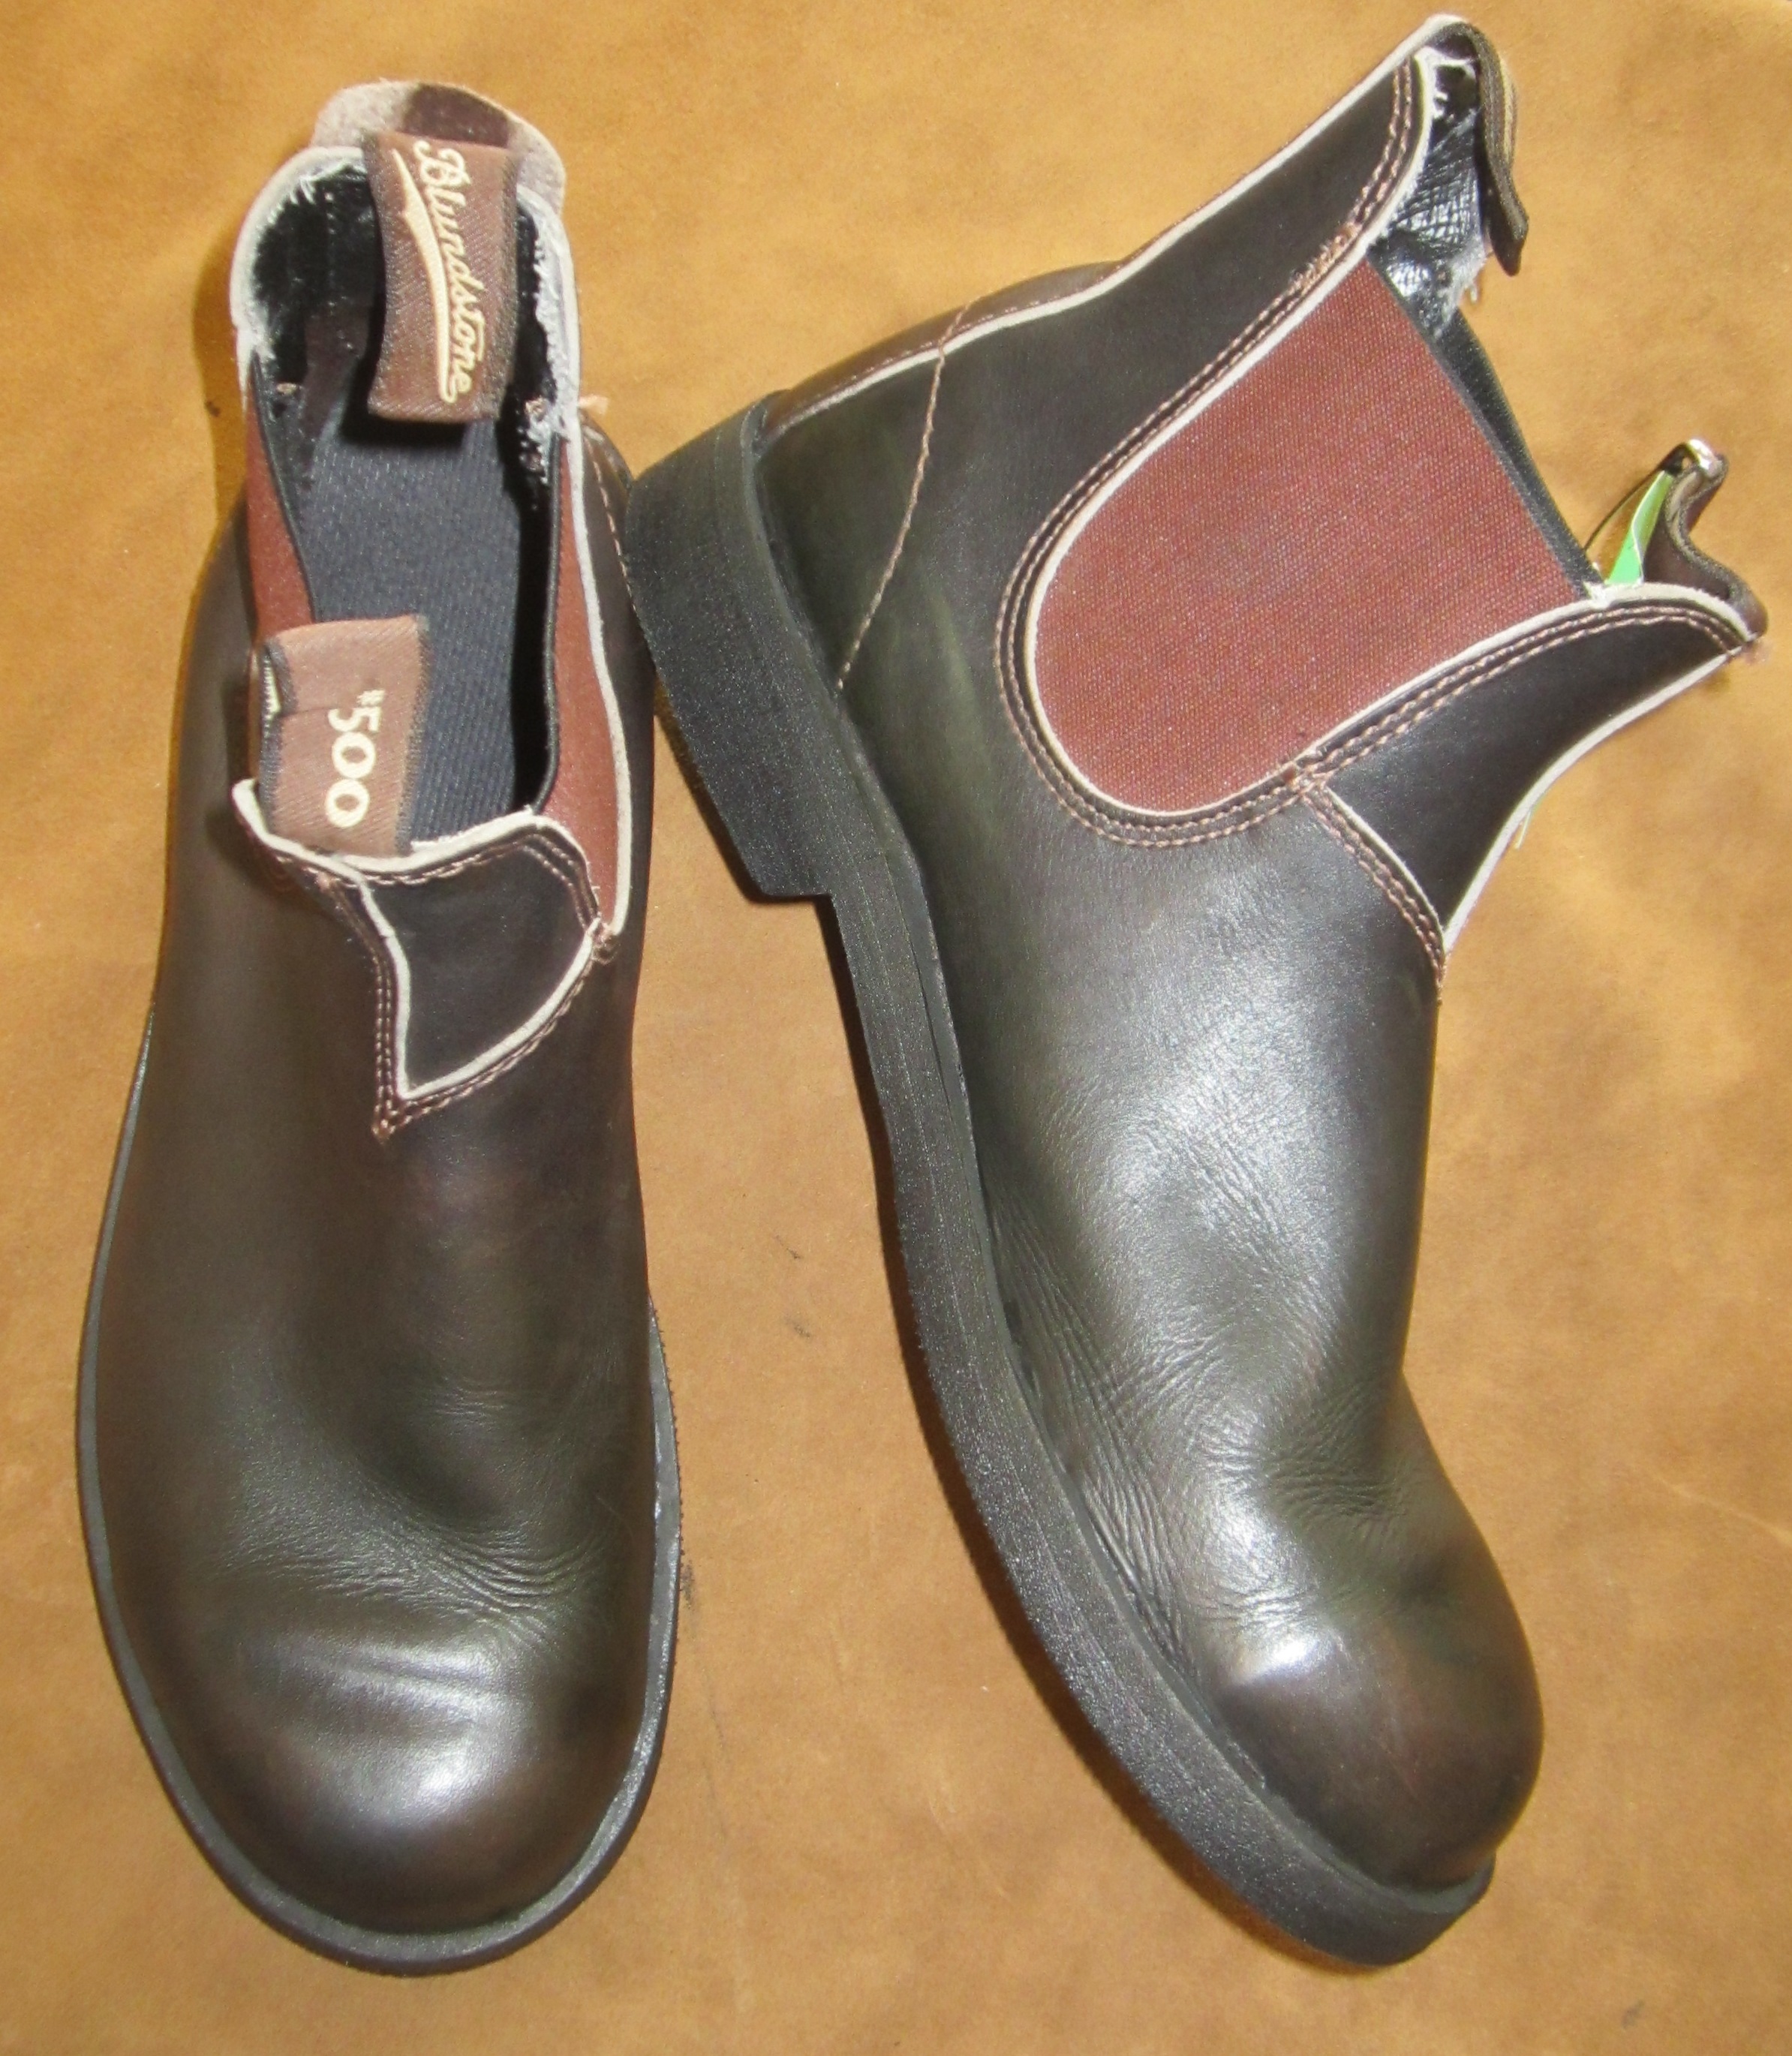 Blundstones resoled with smooth Vibram 1716 soles